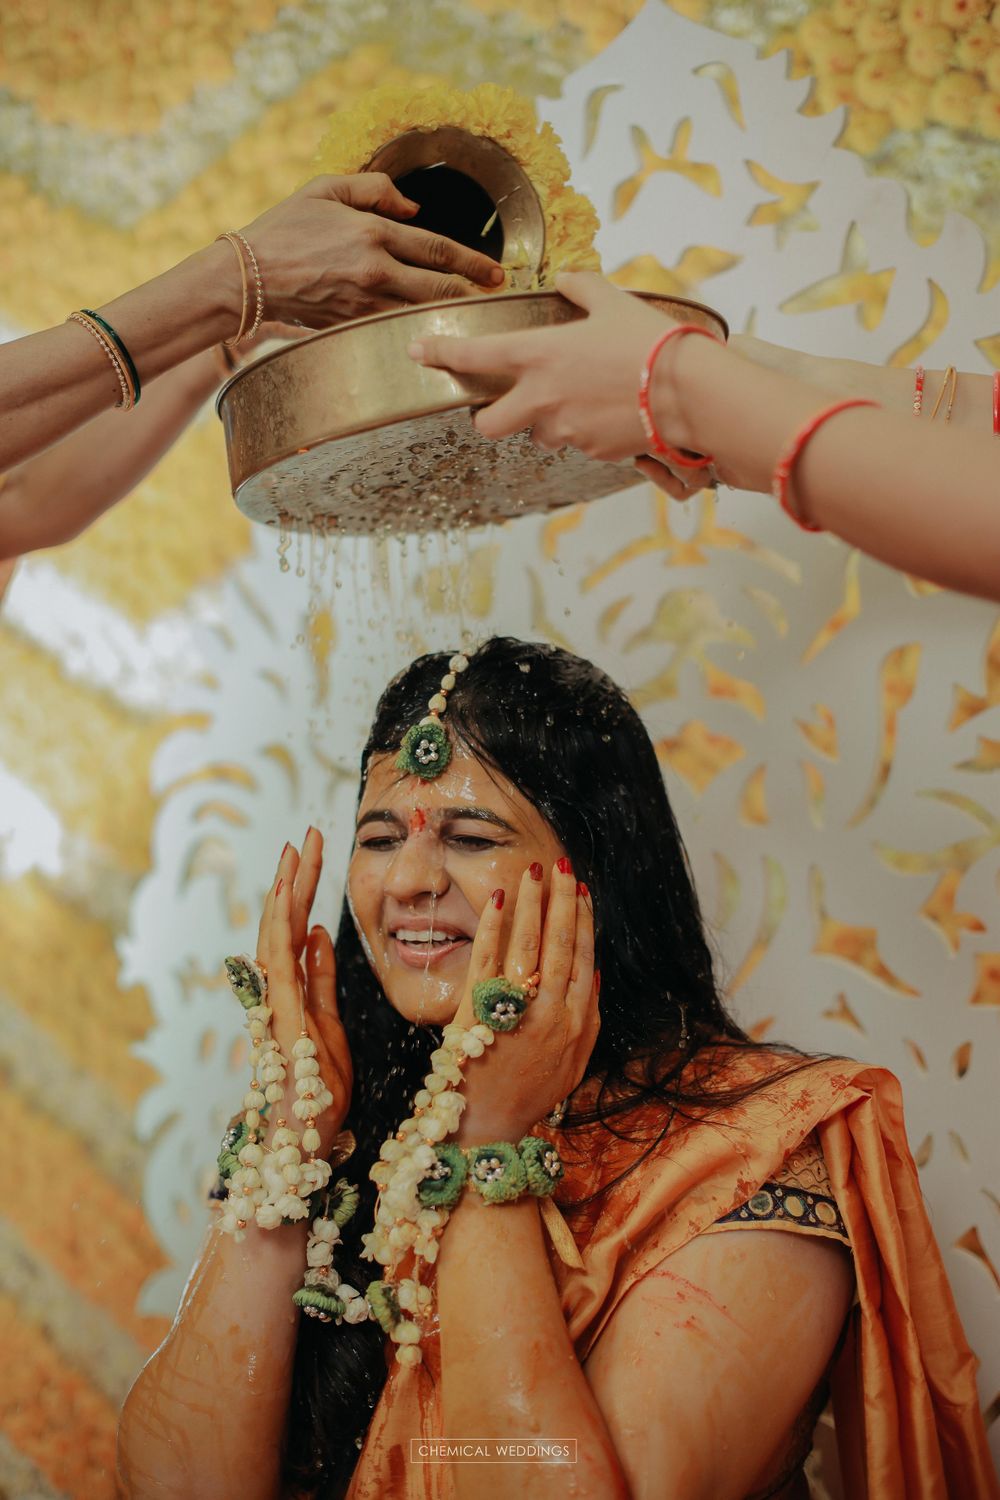 Photo From VENNELA SIDDHARTH - By Chemical Weddings